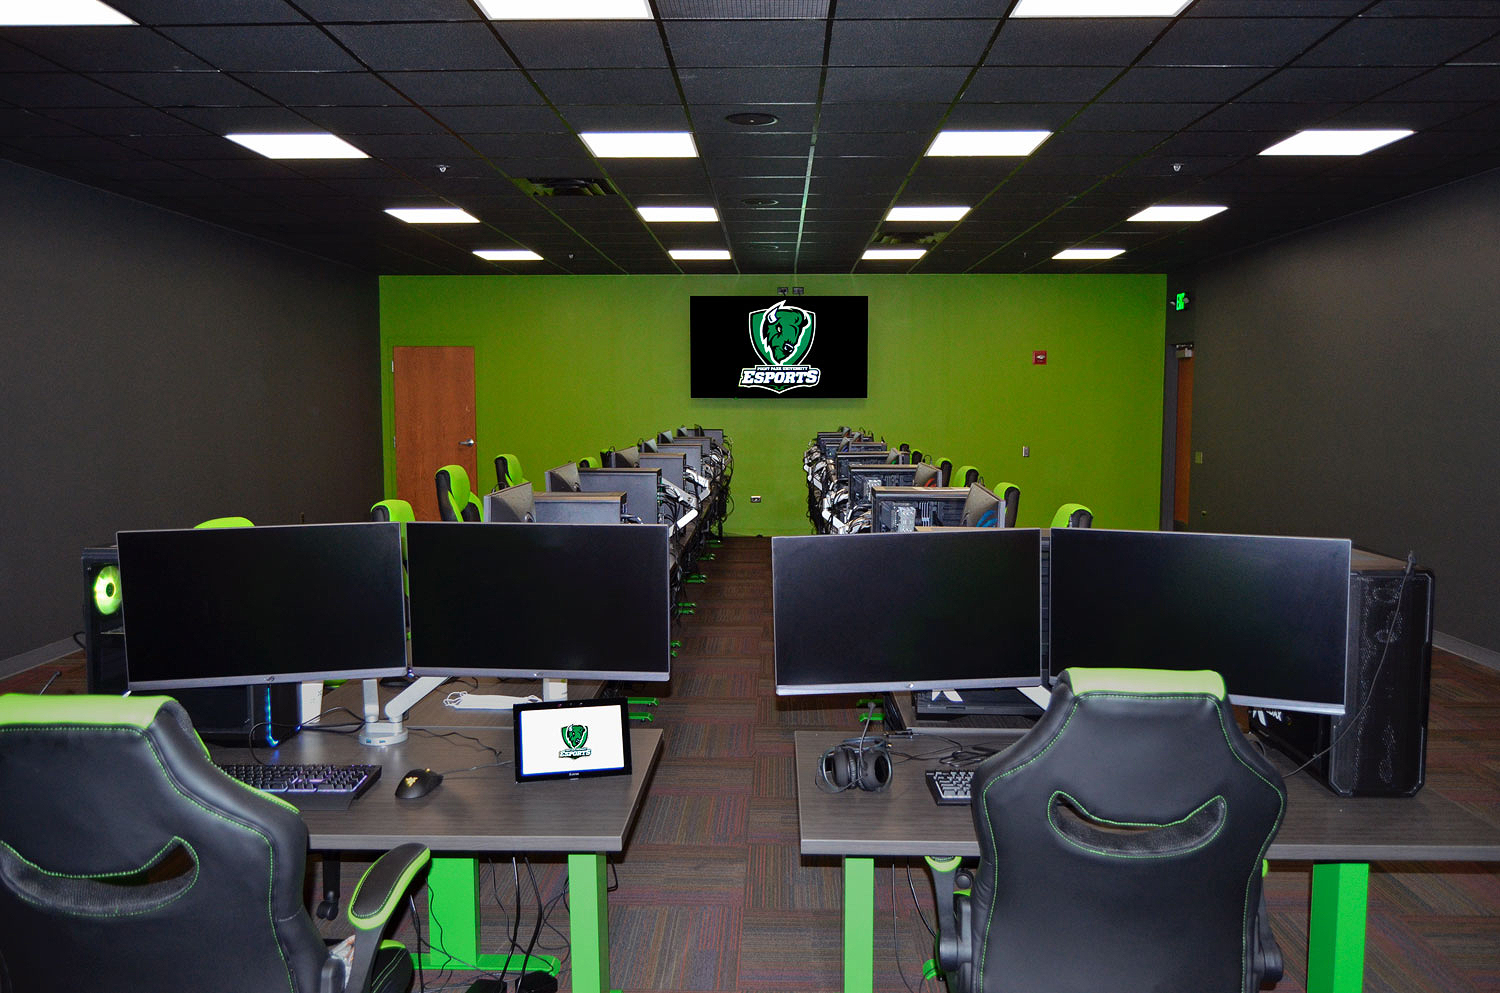 The other students and visitors may watch gaming activities when the coach sends the content from a workstation to the wall displays.